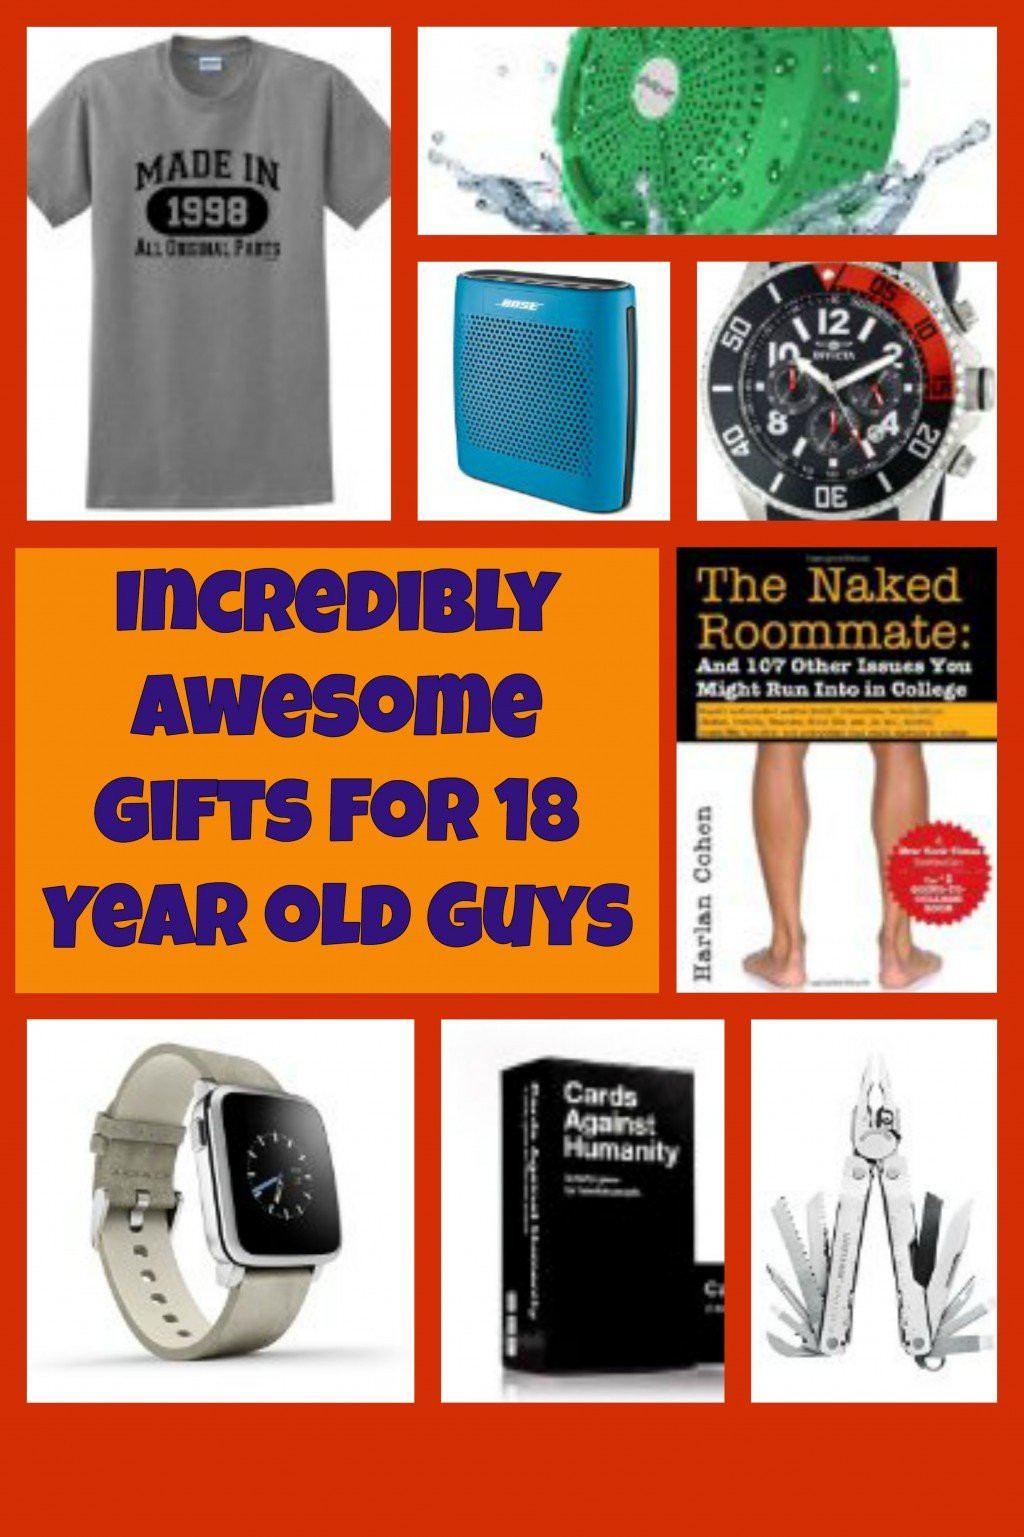 18 Birthday Gift Ideas For Boys
 Incredibly Awesome Gifts for 18 Year Old Boys